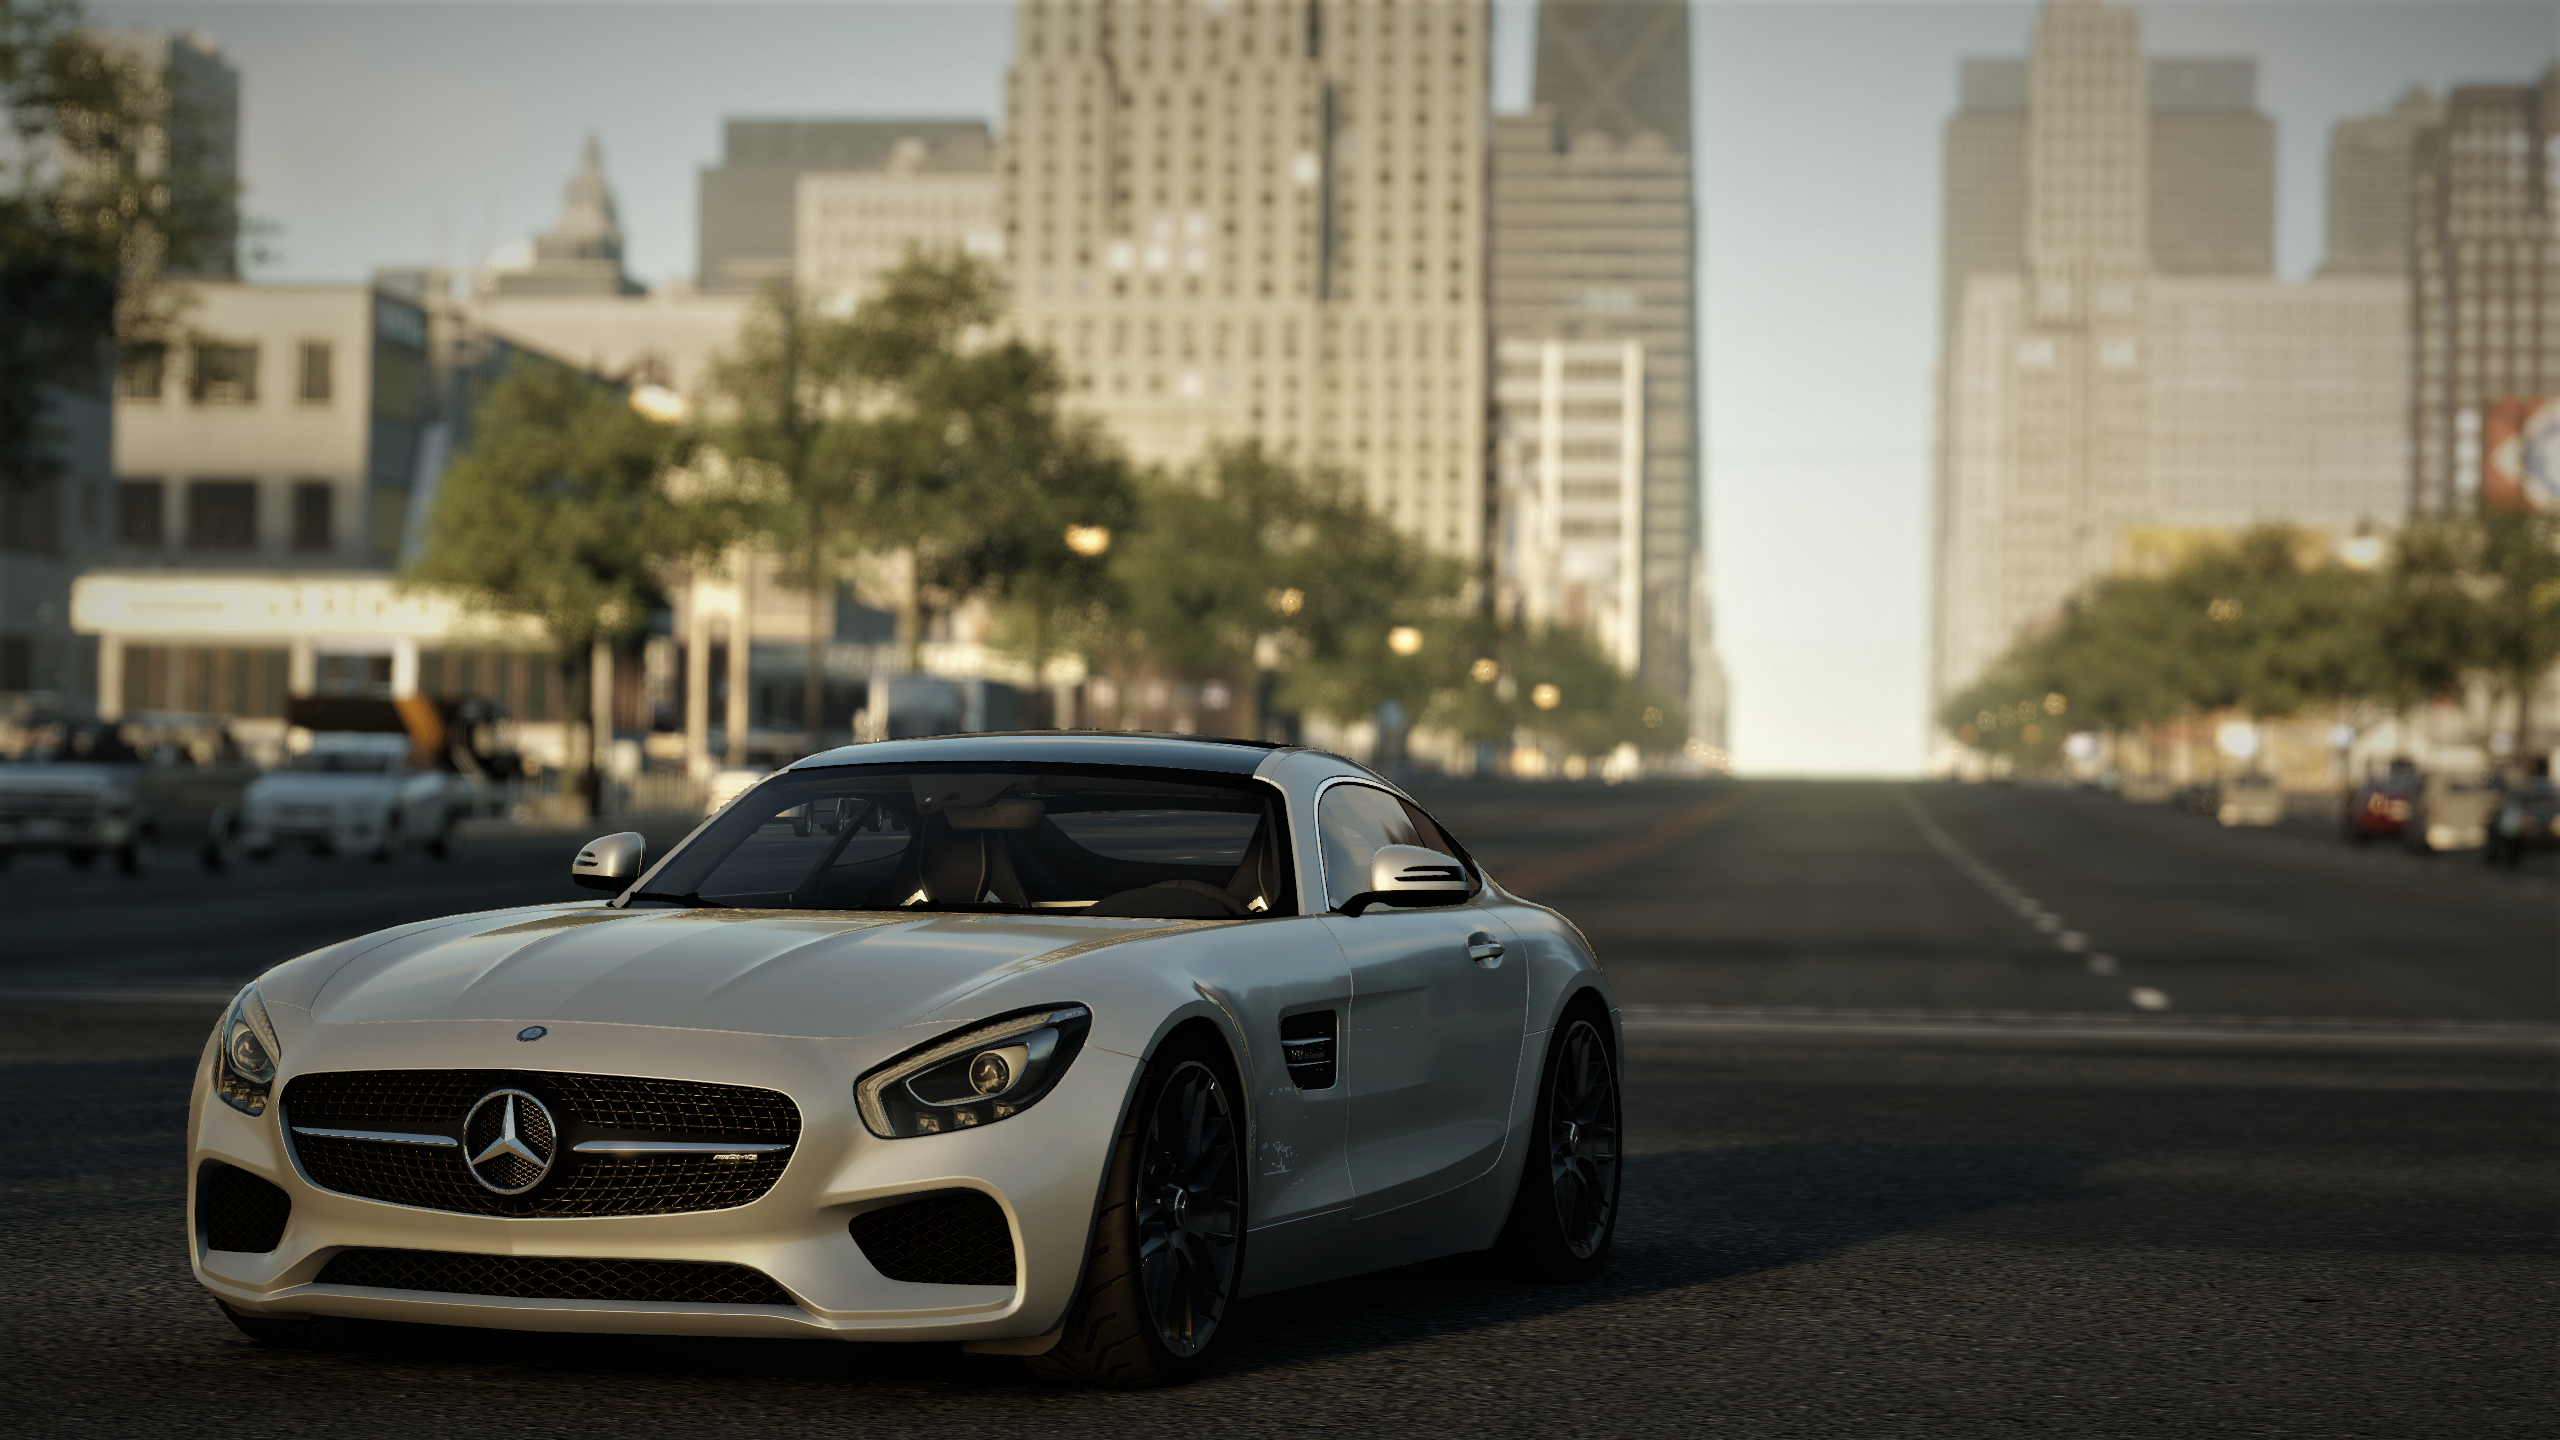 General 2560x1440 Mercedes-Benz car gray gray cars Detroit Mercedes-AMG GT frontal view vehicle